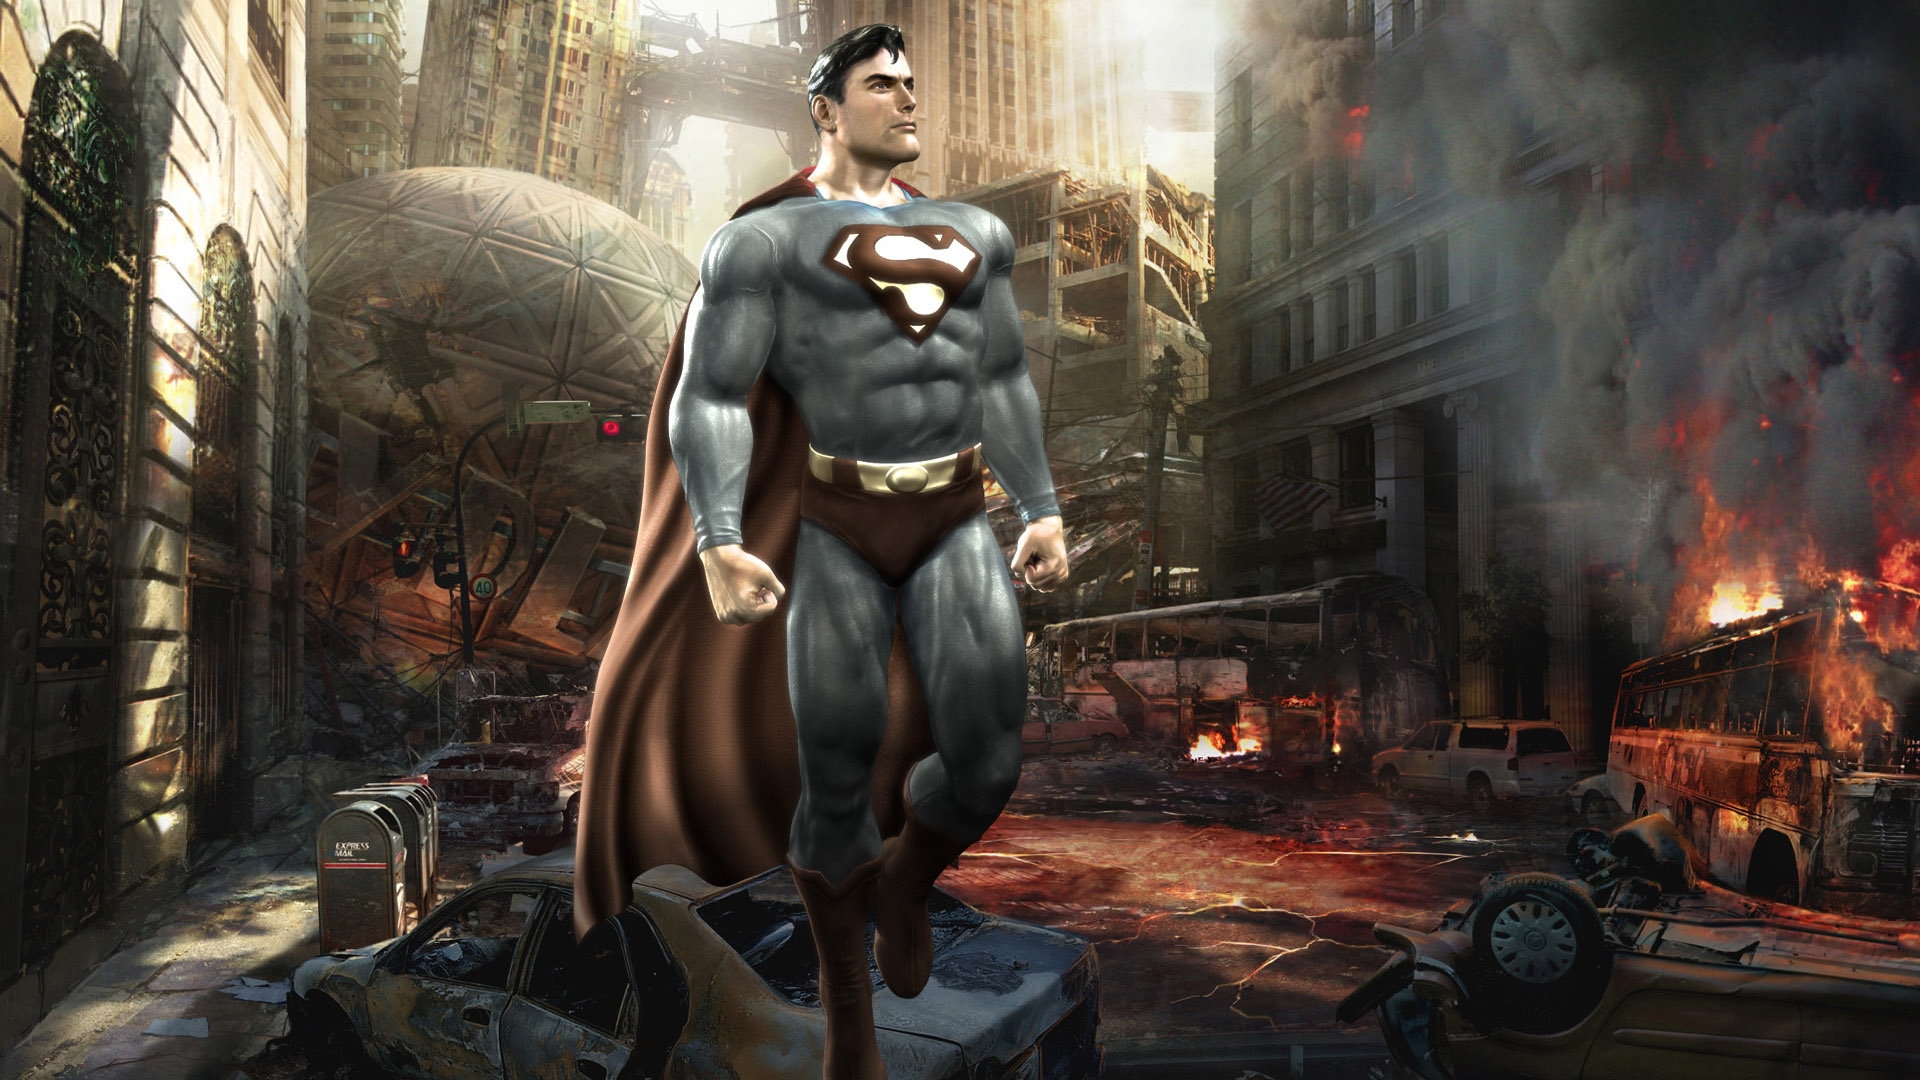 There are a Ton of Superman References in Batman: Arkham Knight